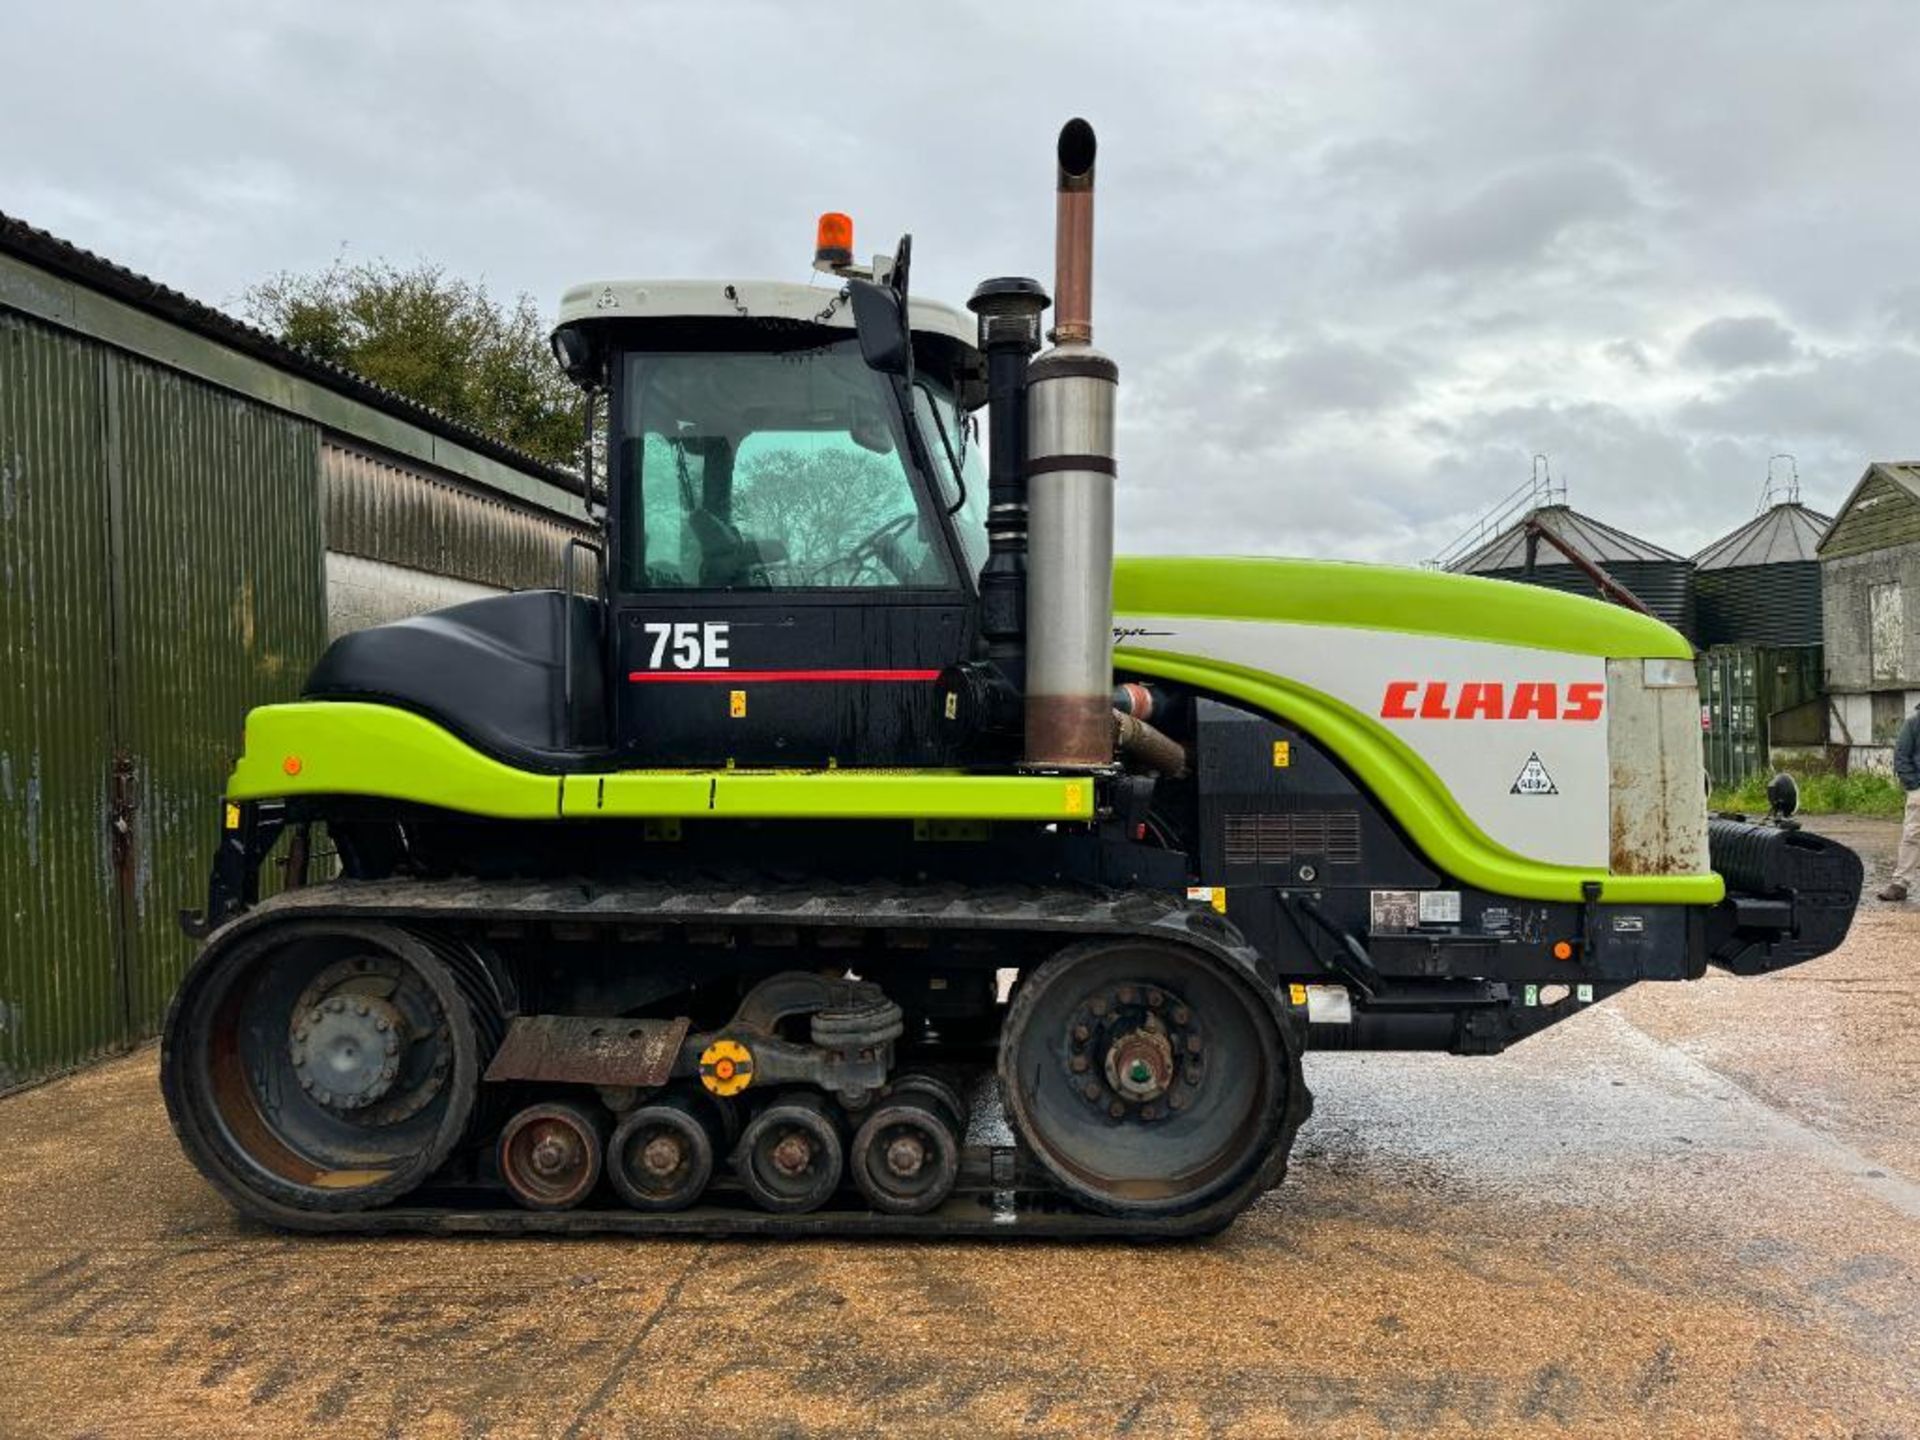 2001 Claas 75E Challenger rubber tracked crawler with 30" tracks, 20No 45kg front wafer weights, 4 m - Bild 18 aus 26